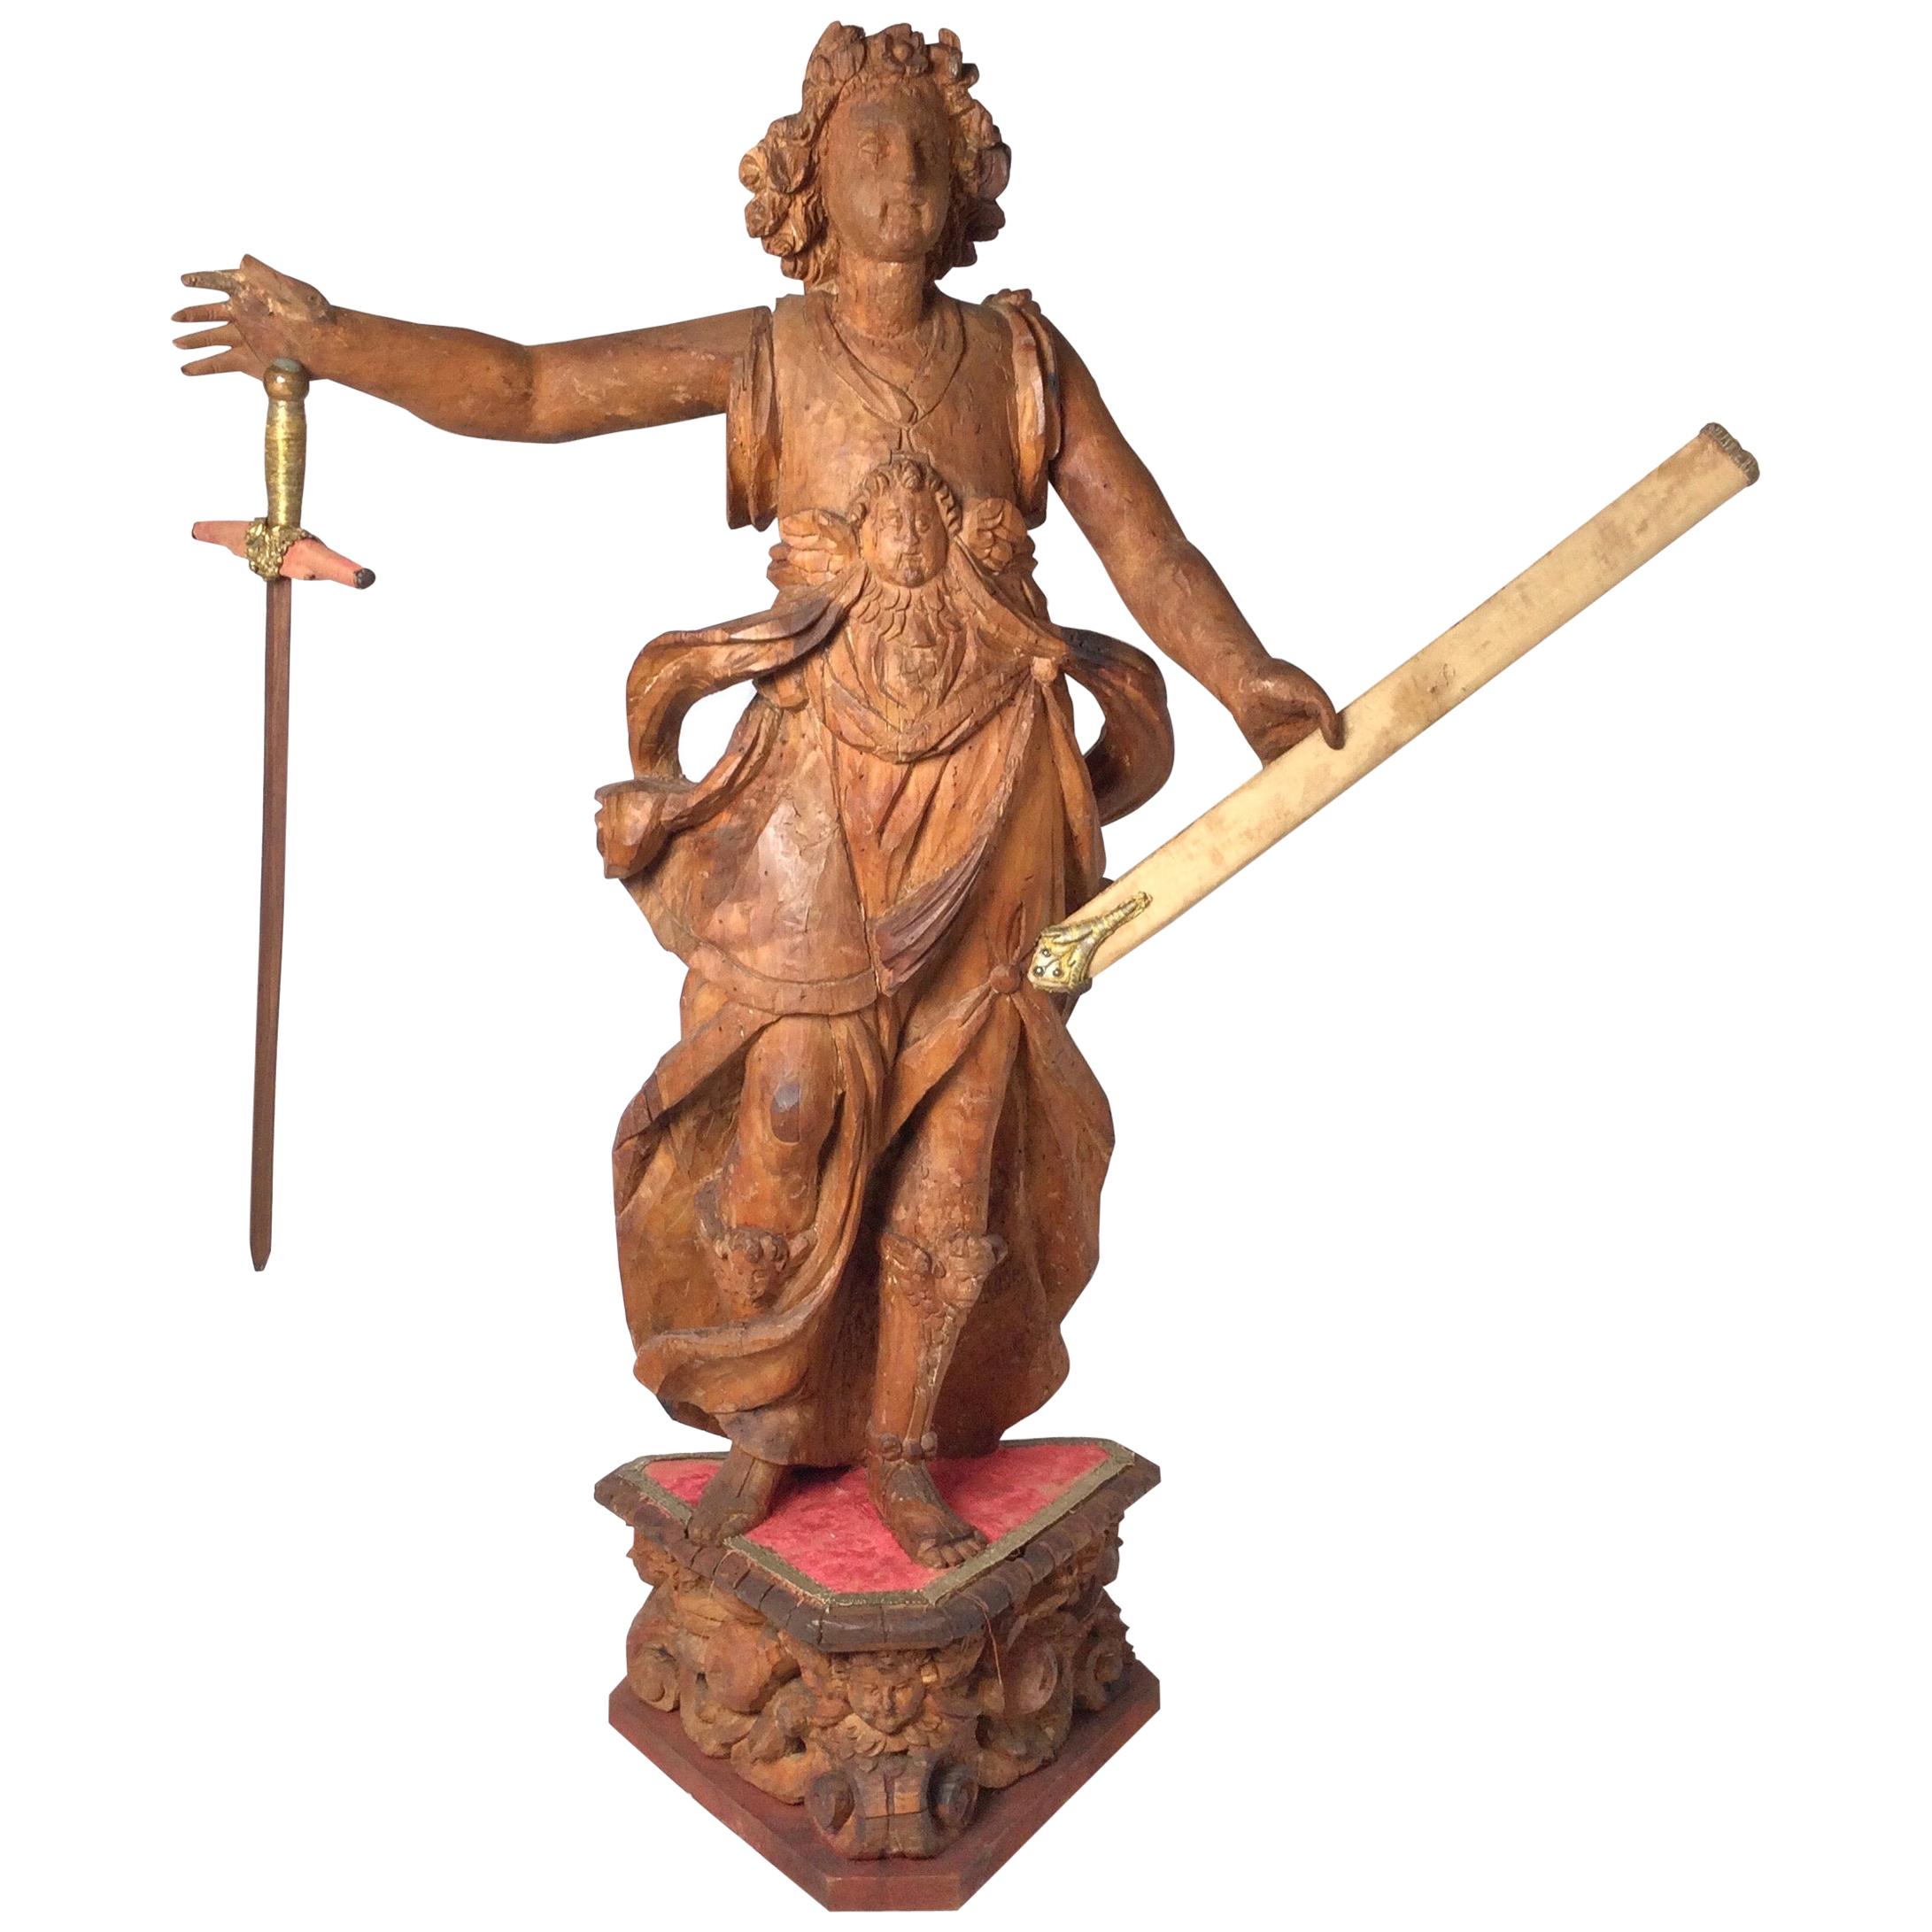 Exceptional 17th Century Carved Wooden Statue of Saint Micheal